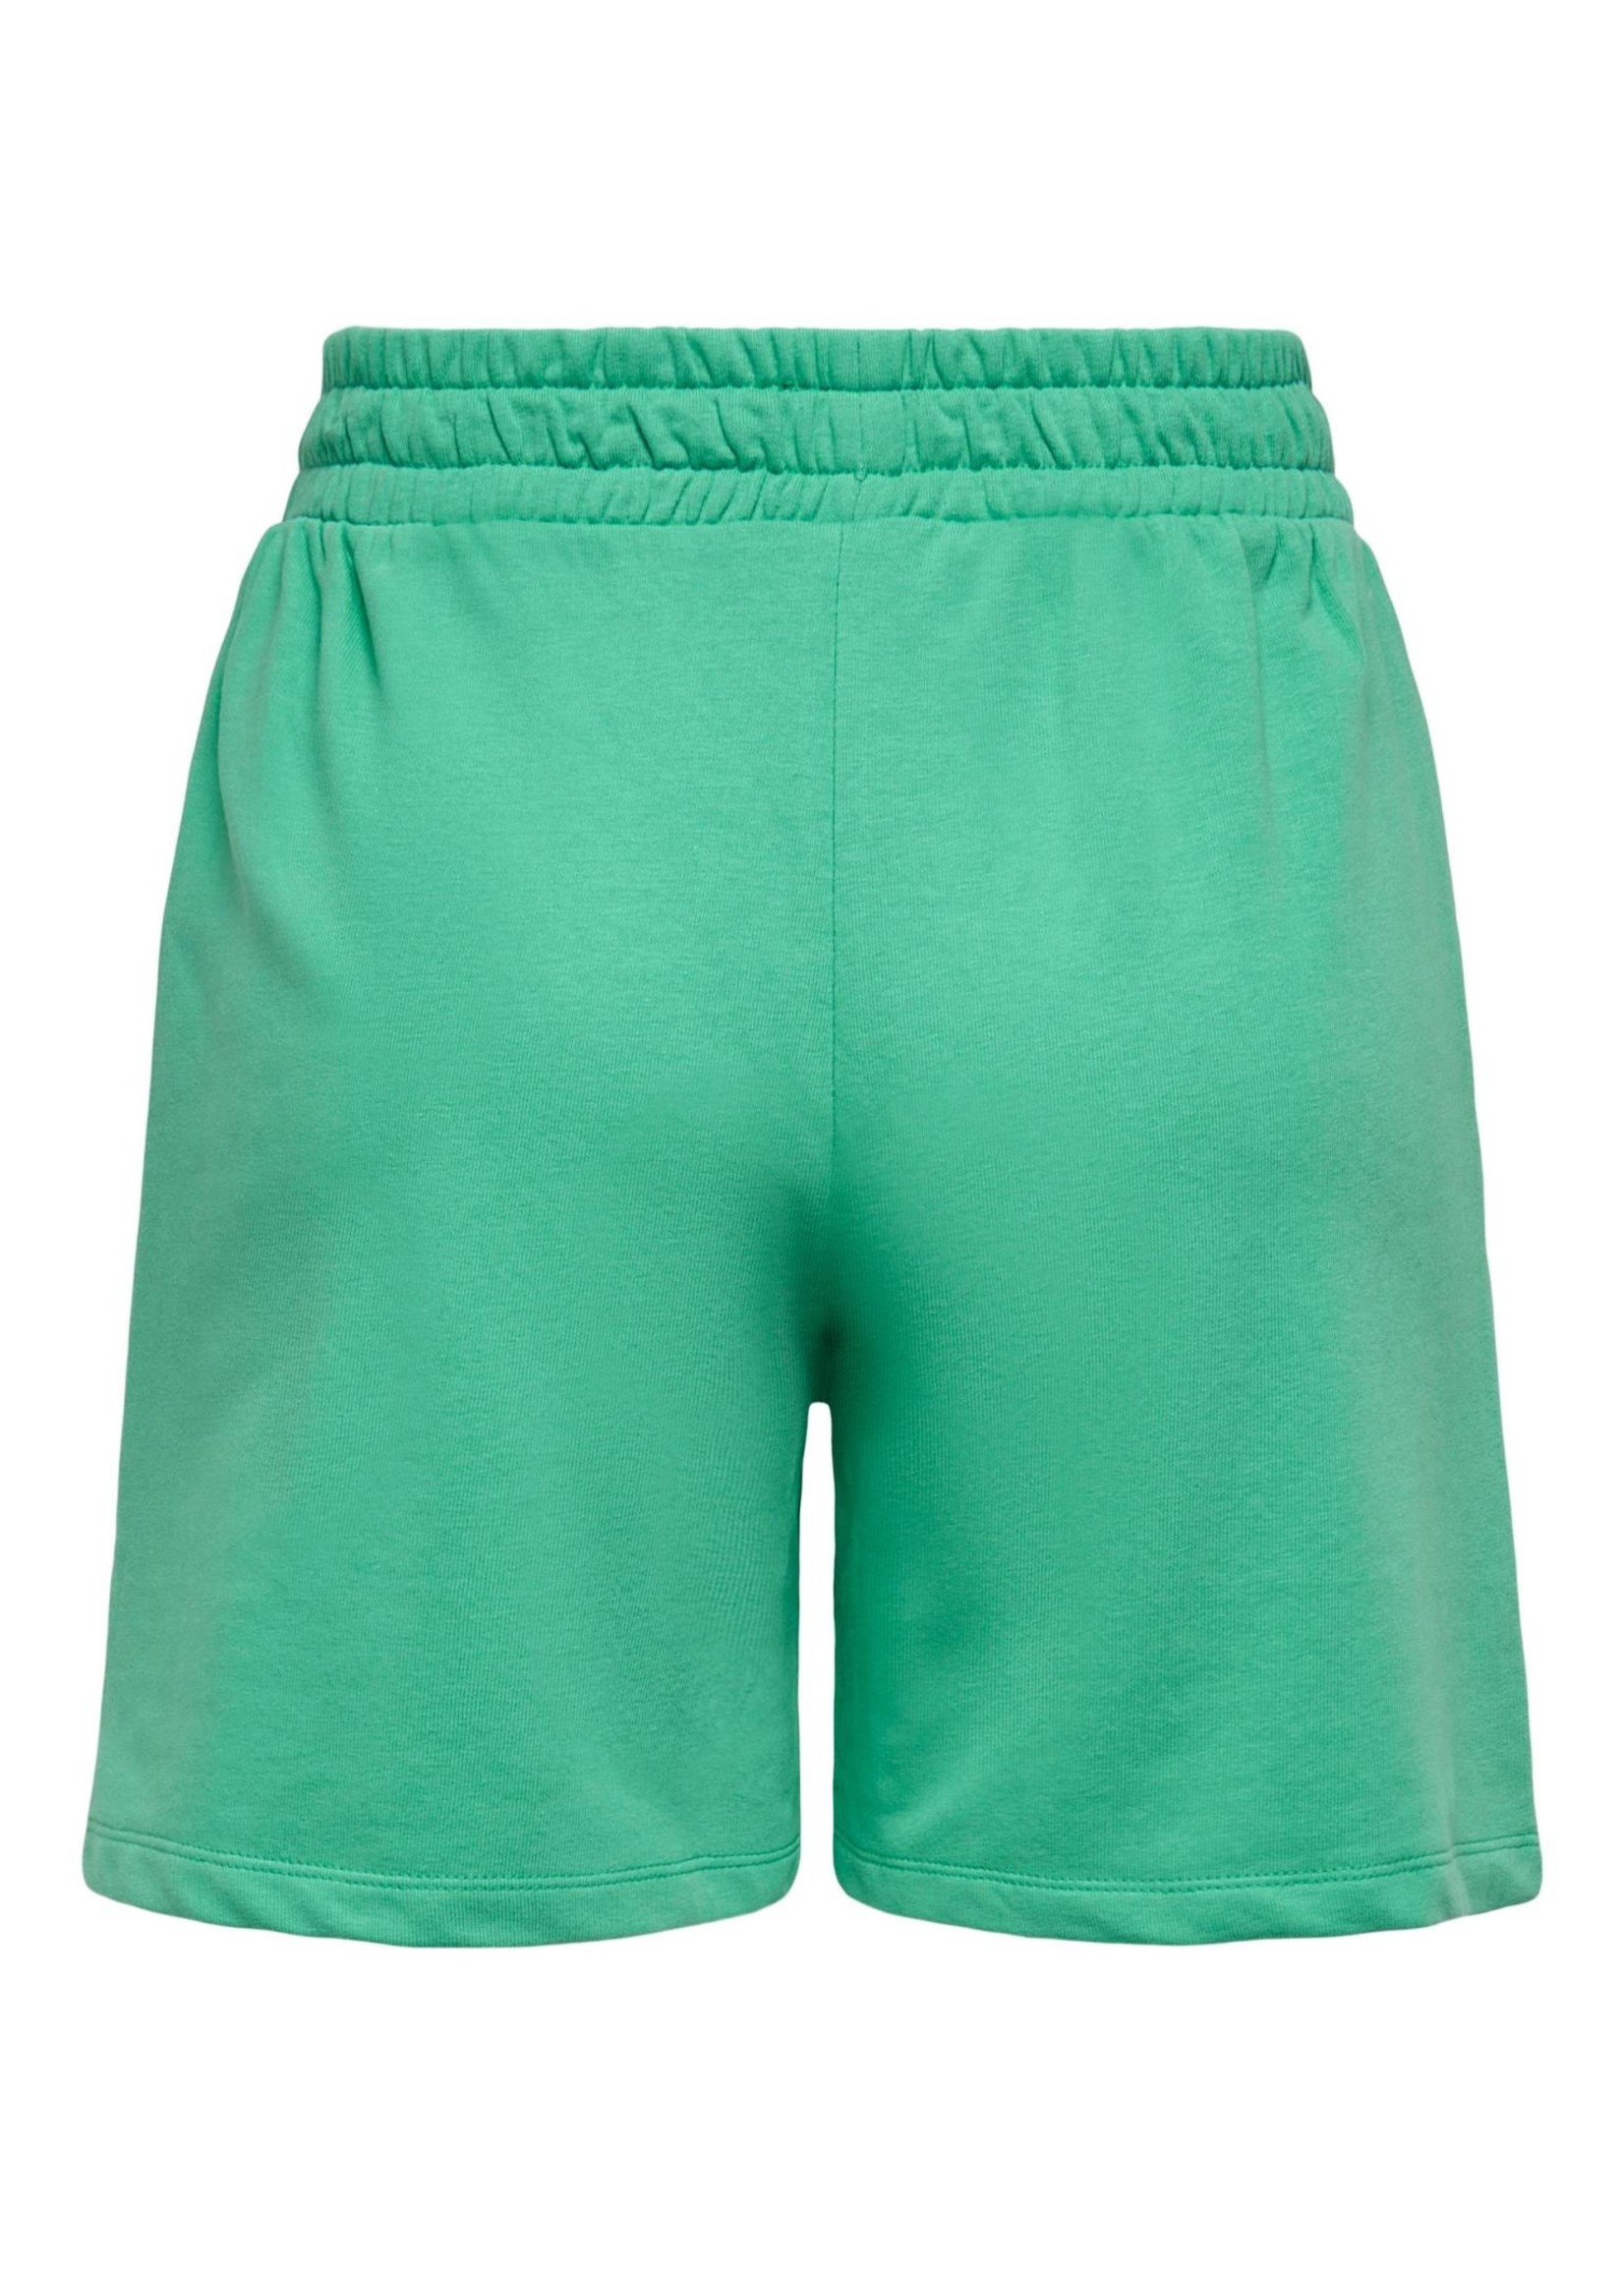 ONLY NISSI SHORTS SWT marine green kind